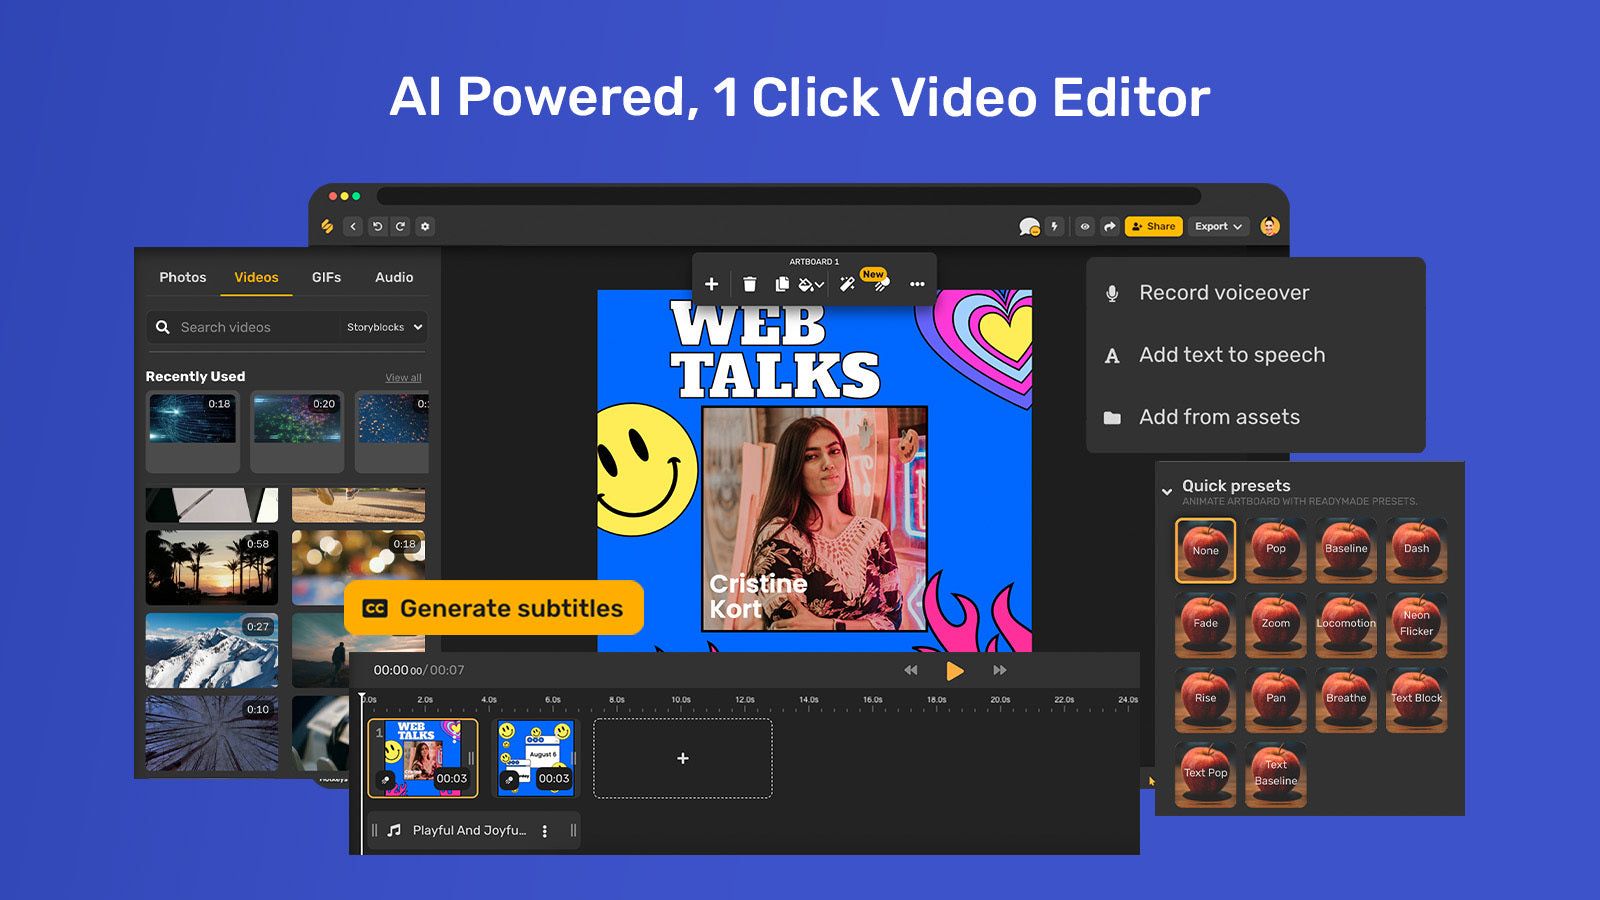 Video editing made simple with Simplified